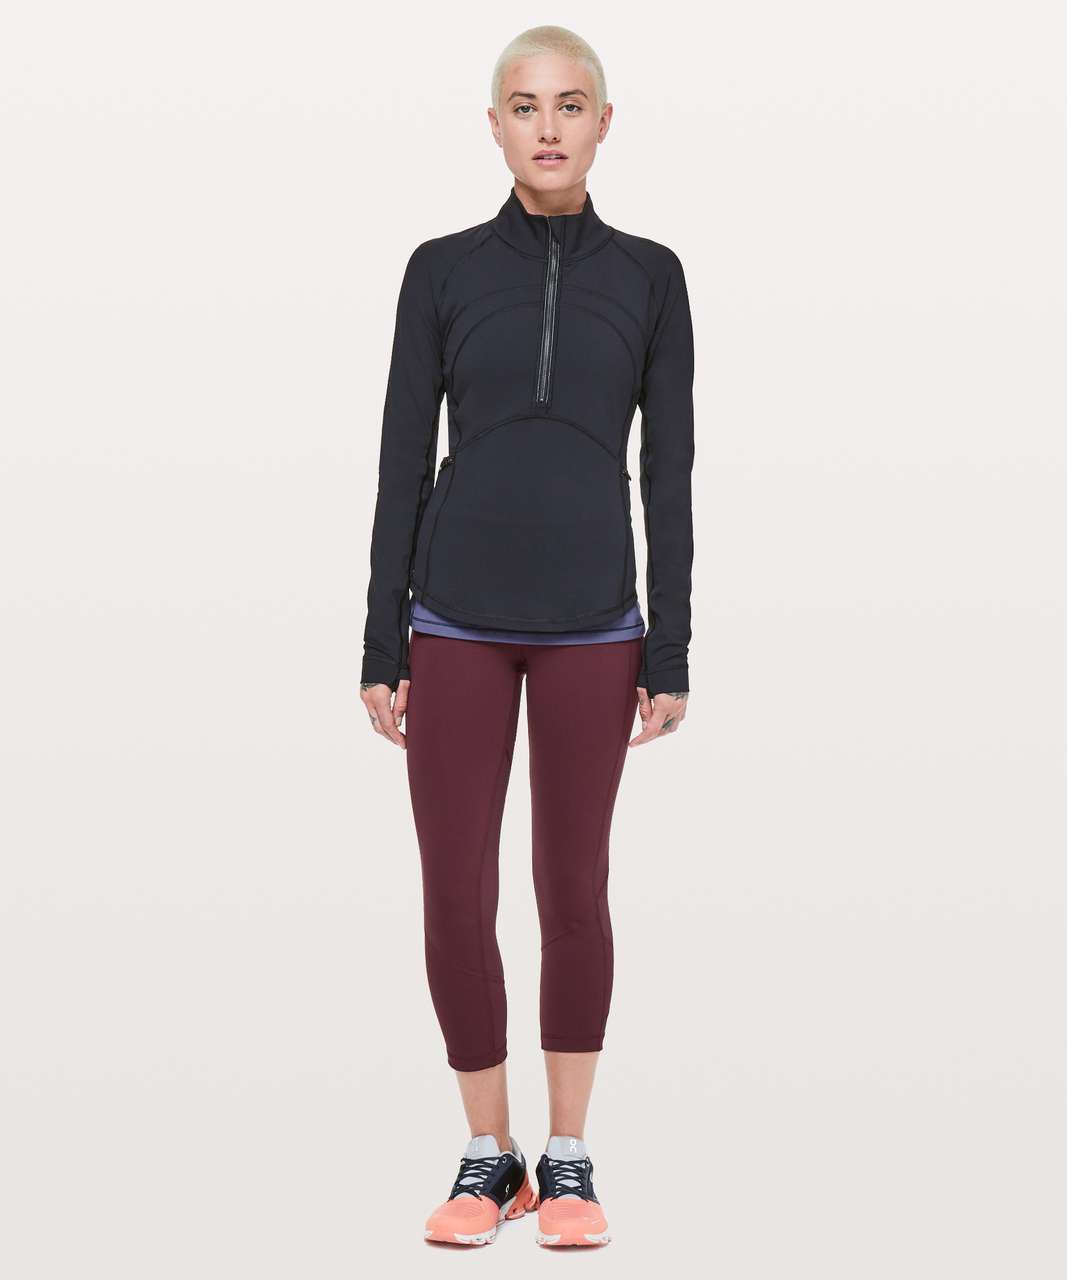 Lululemon Women's Pace Rival Crop 22 Leggings Ruby Wine Size 10 - $47 -  From Jessica